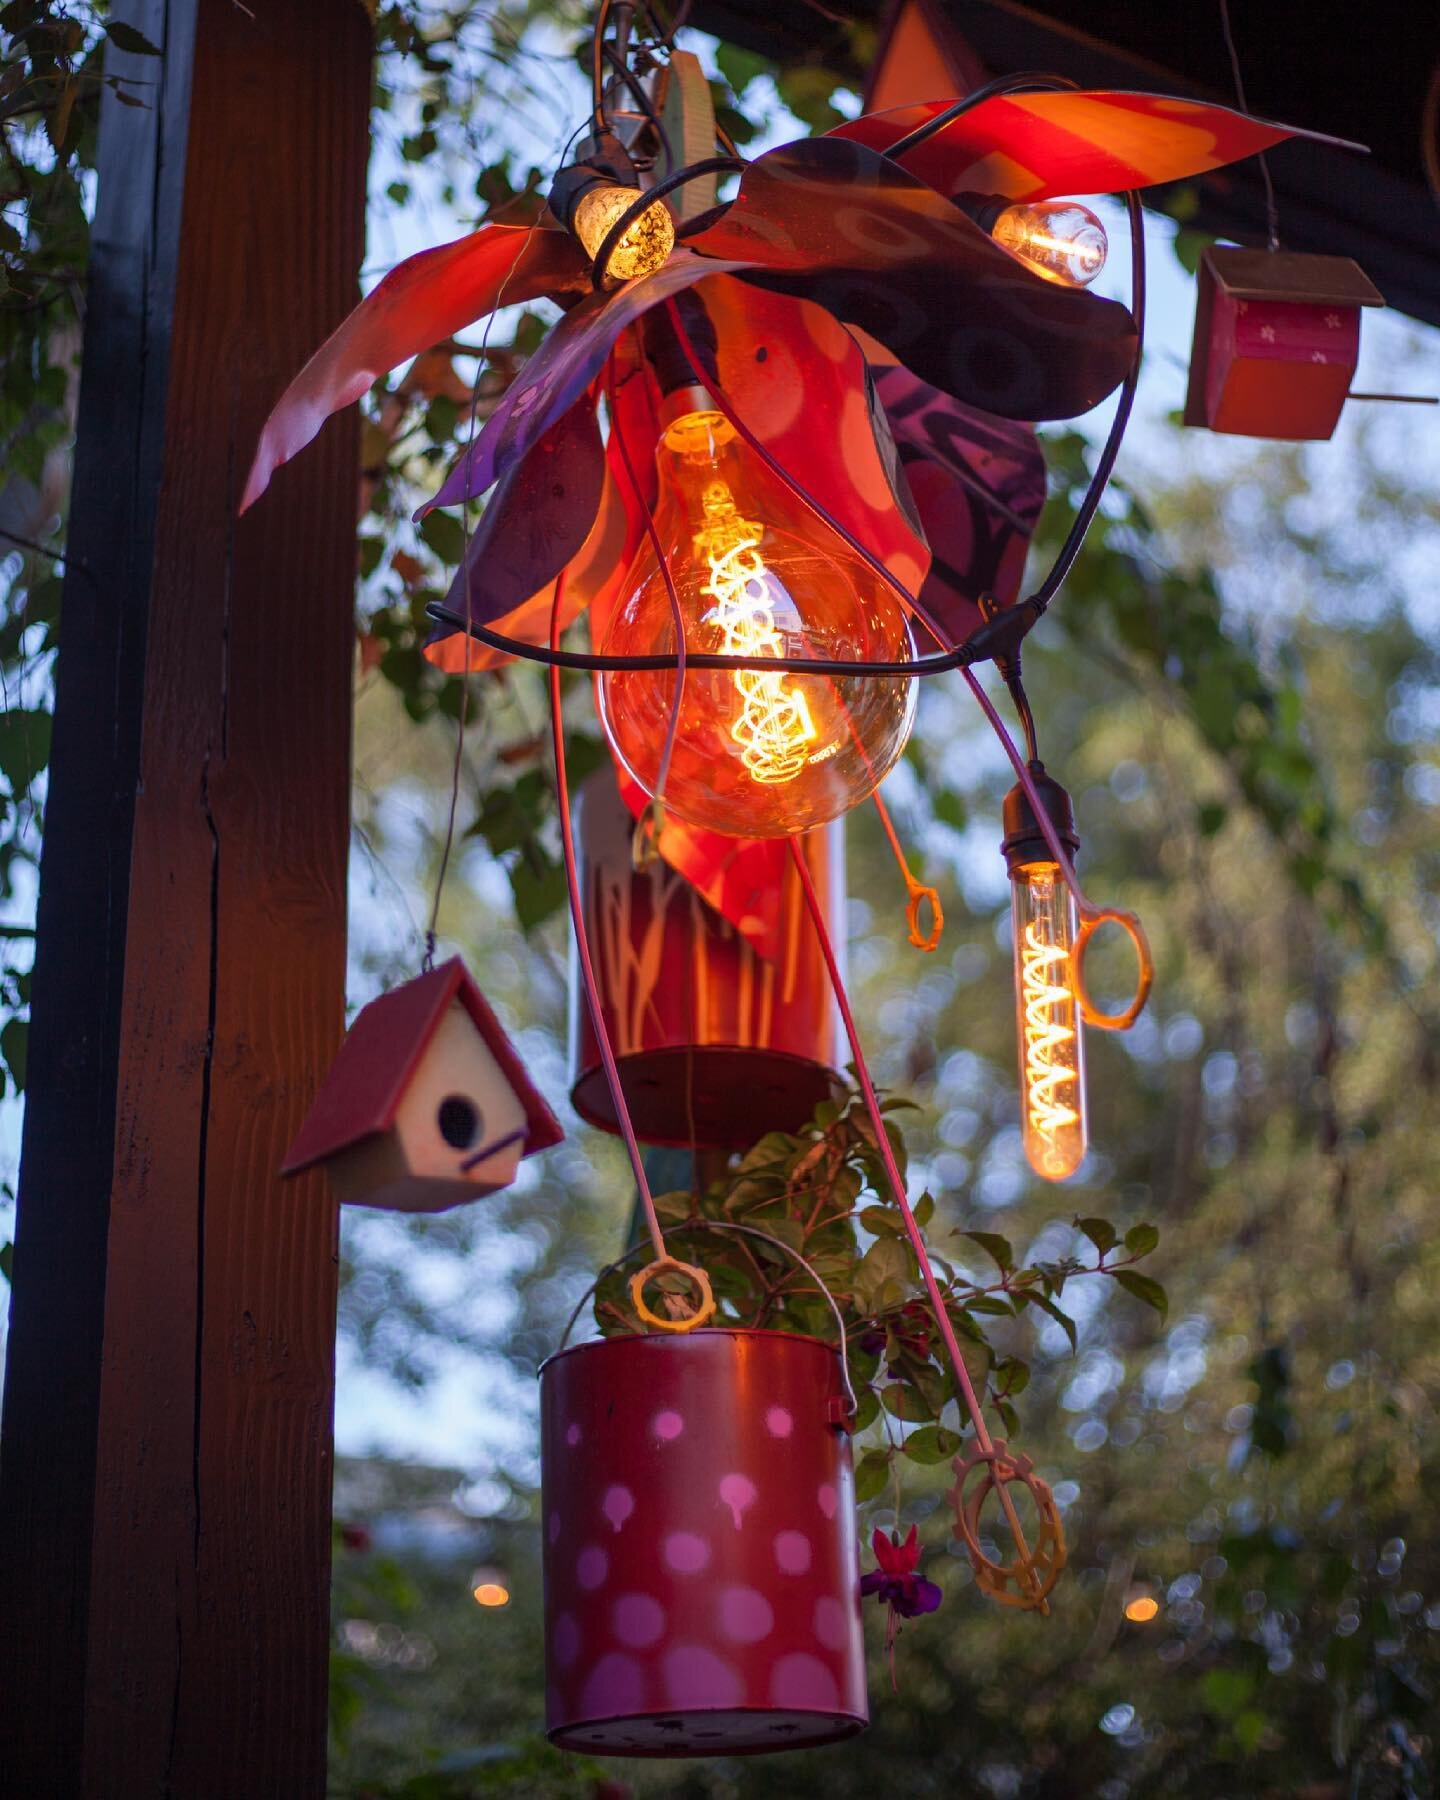 Detailed look at my hanging fuchsia flower chandelier at @parkandrecsd. Hummingbirds love these flowers and this one attracts-6ft-tall-keg/barrel-chested-king-of-all-the-birds types. 

I harvested the base from an old office fan, added flower petals 